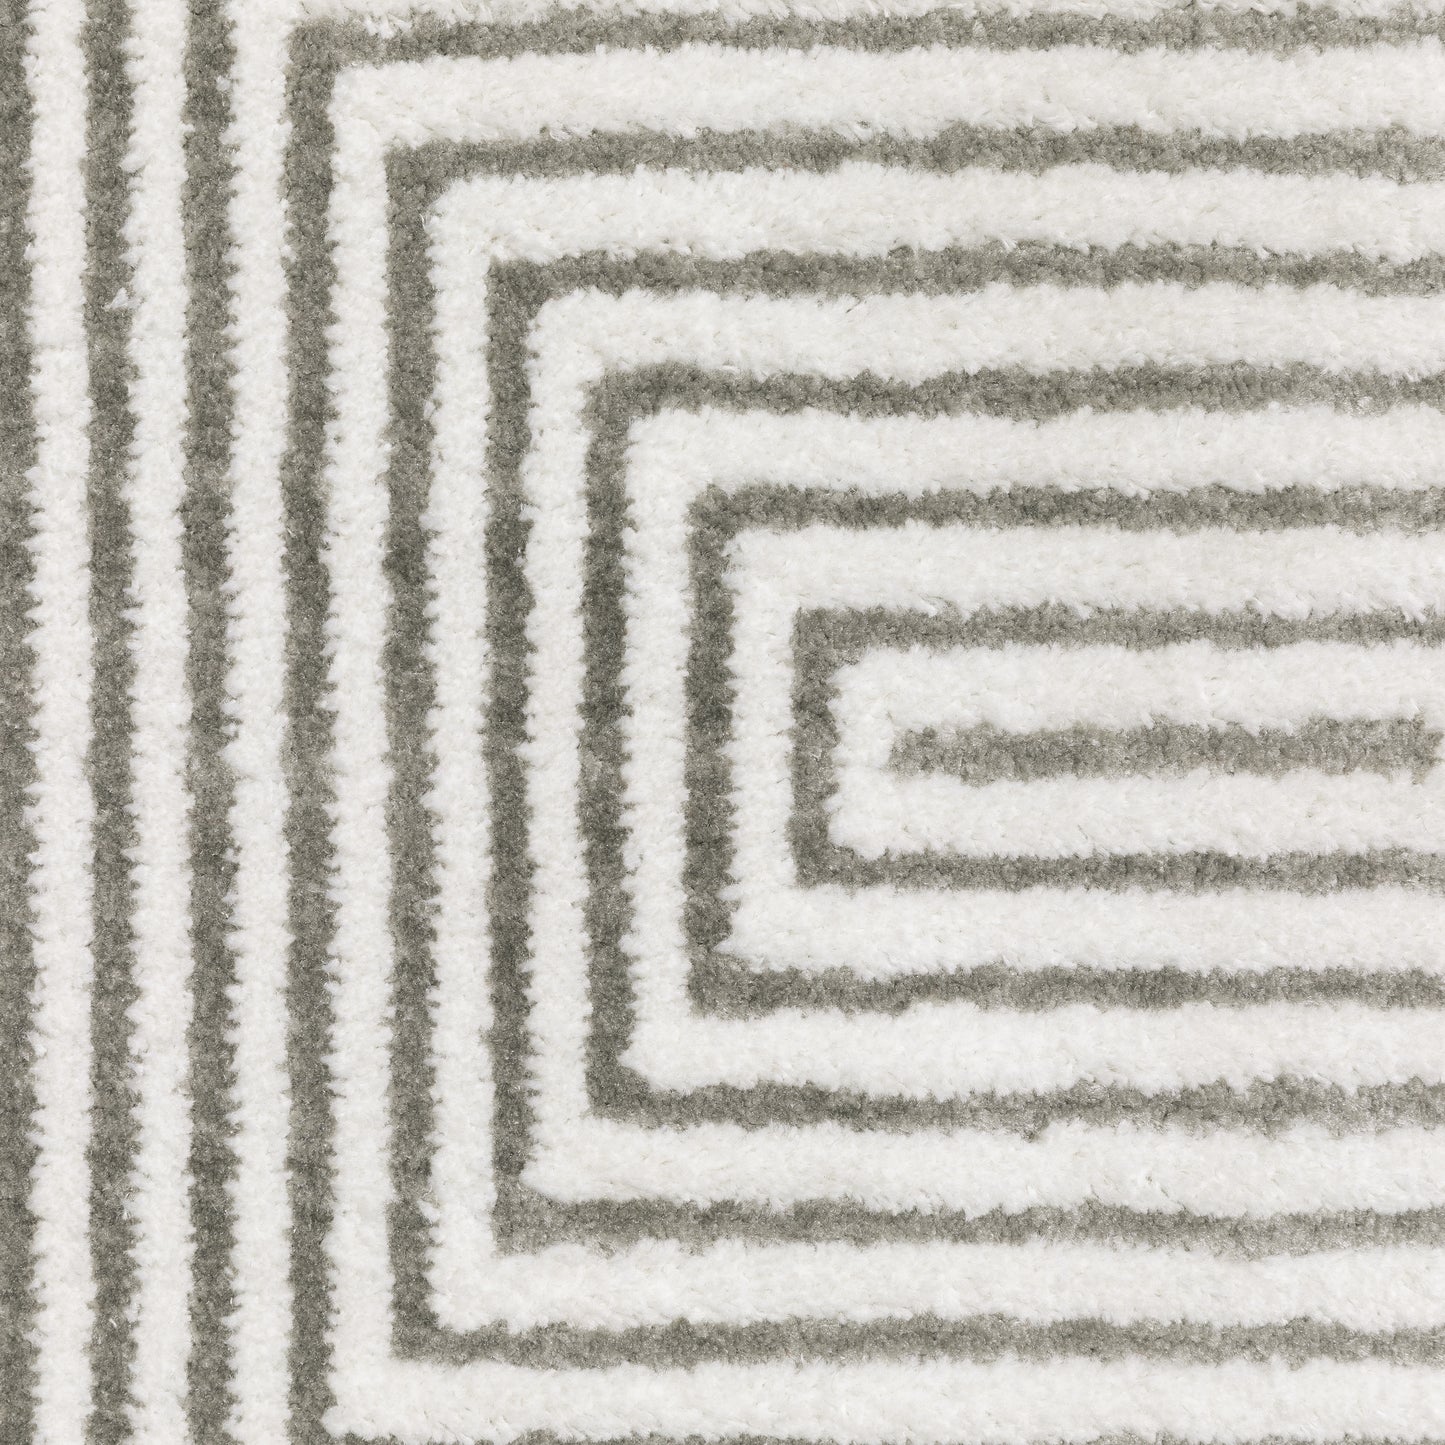 MONTECITO Geometric Power-Loomed Synthetic Blend Indoor Area Rug by Oriental Weavers